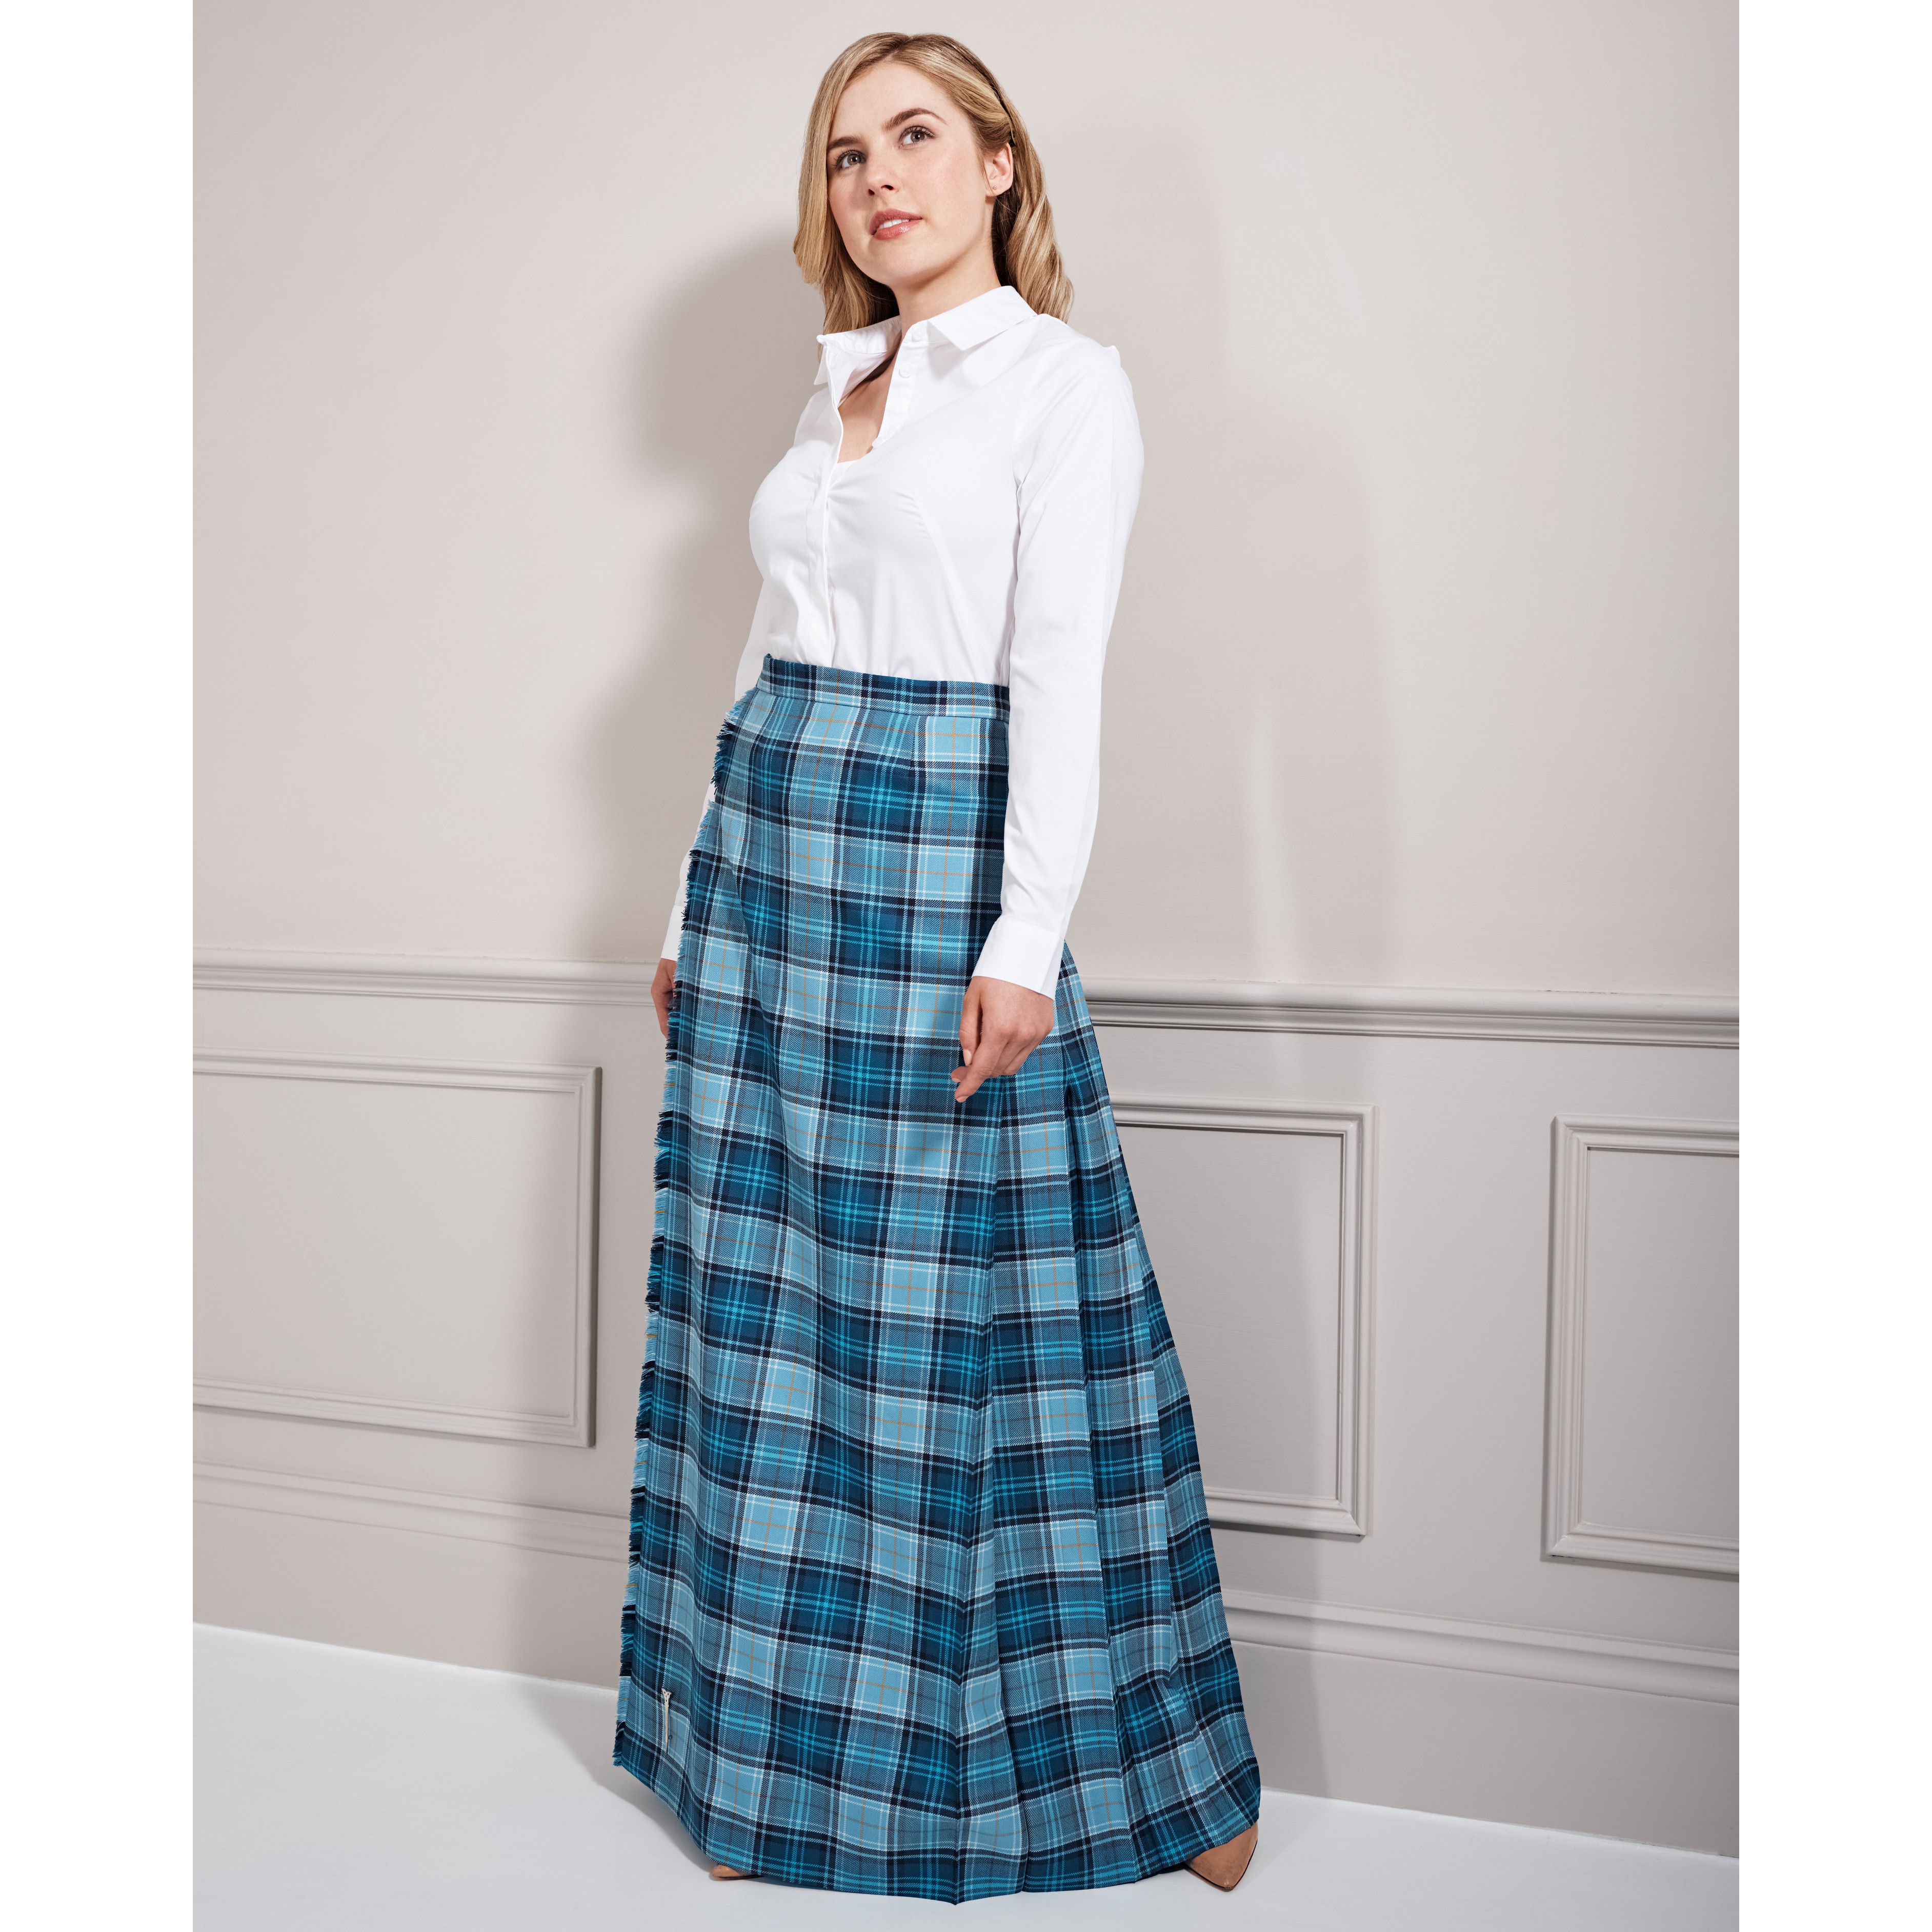 The Classic Kinloch Anderson Kilted Skirt in Maxi Length Made to Order